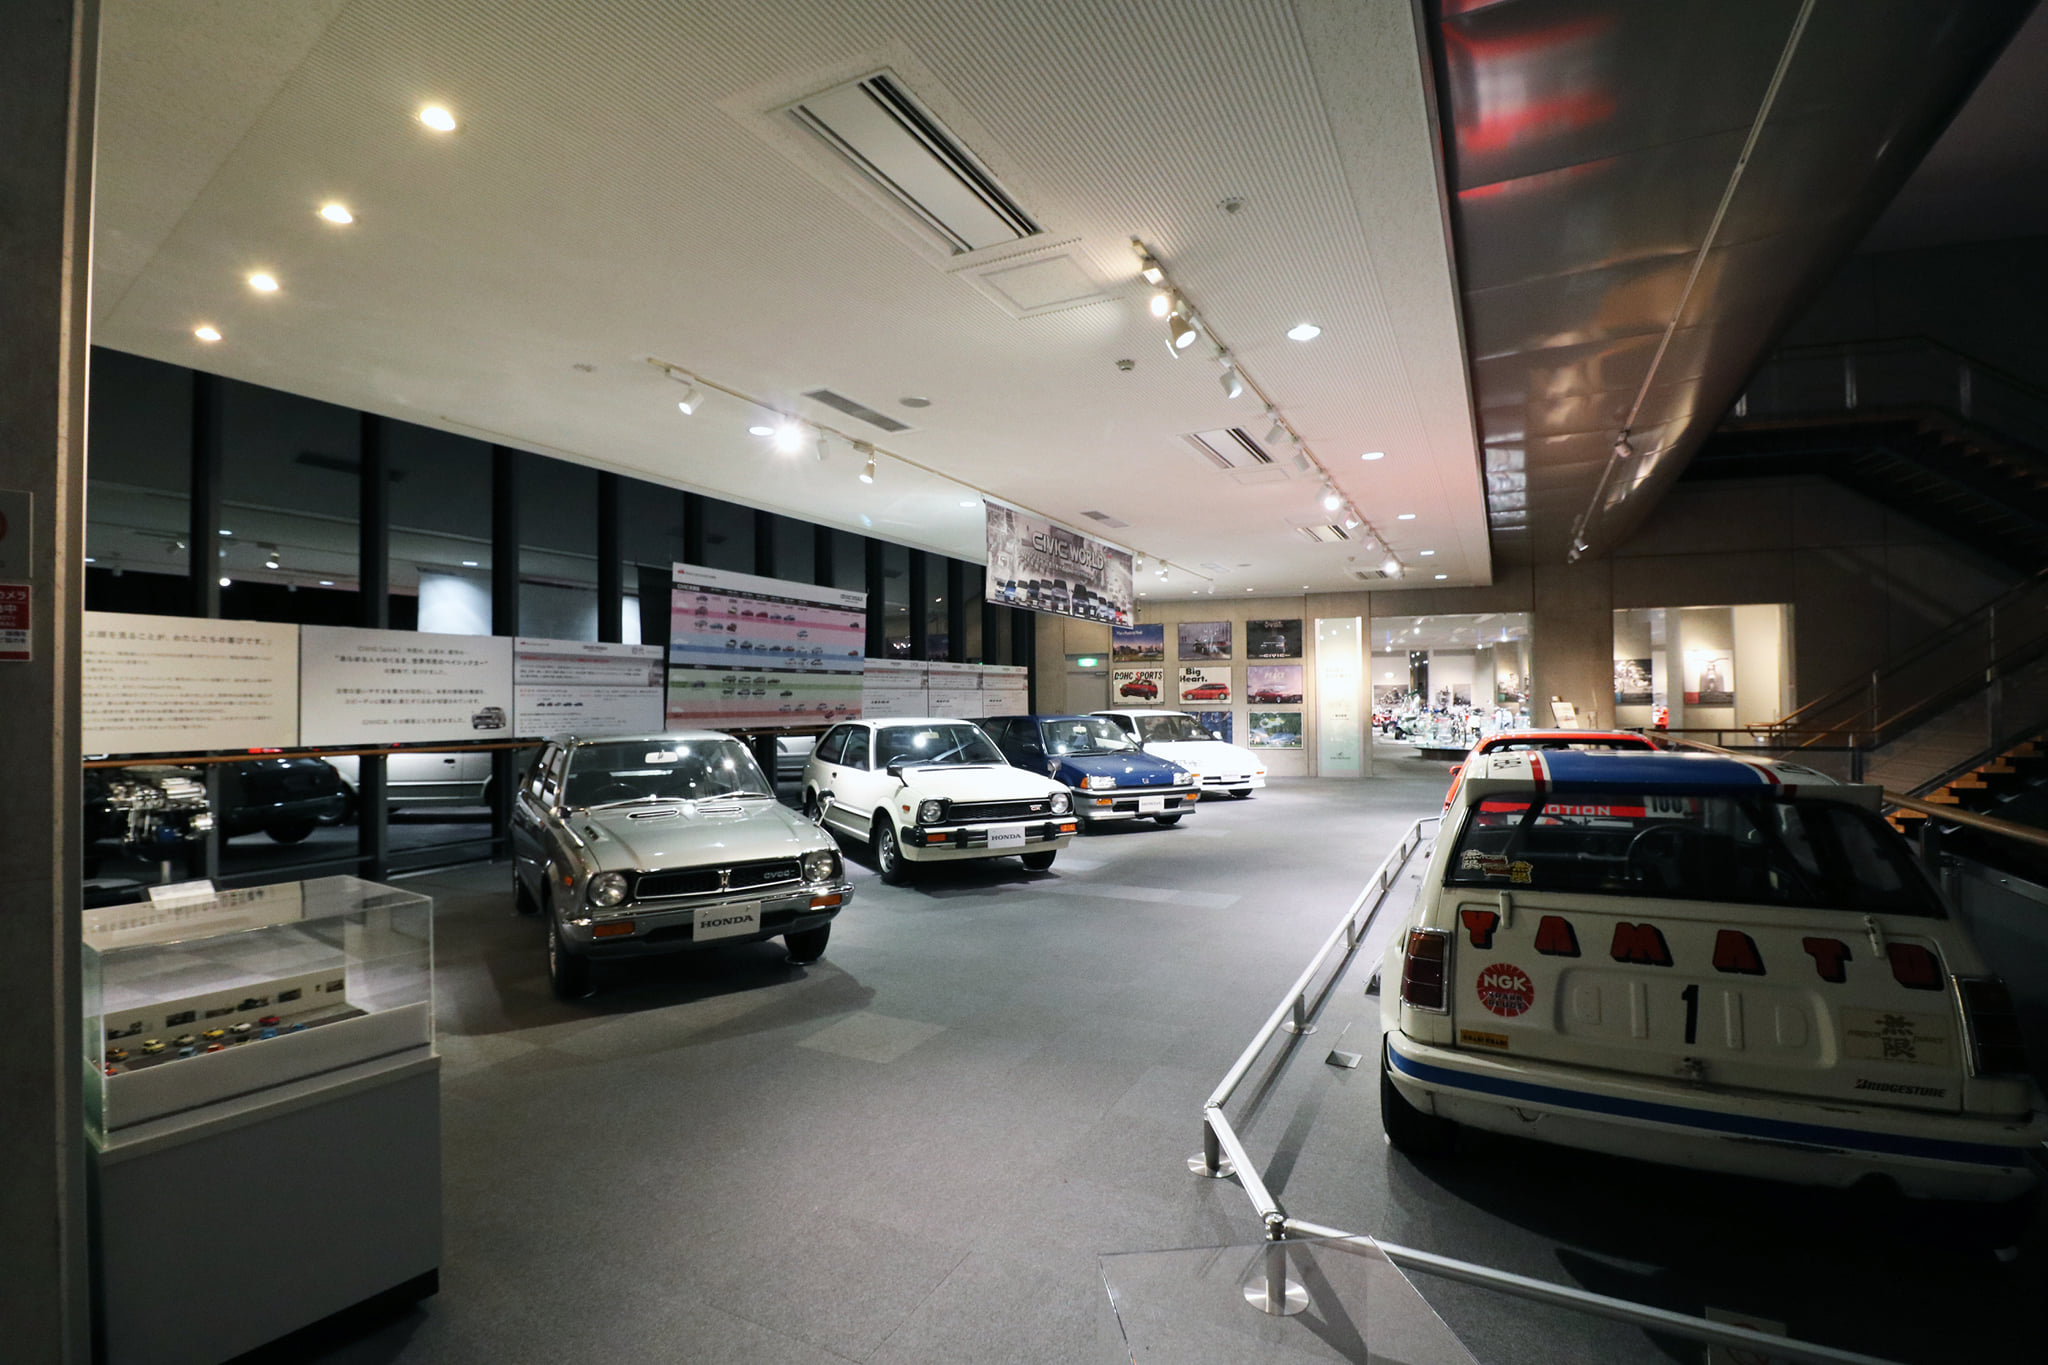 GALLERIES: The Honda Collection Hall's “Civic World” exhibit